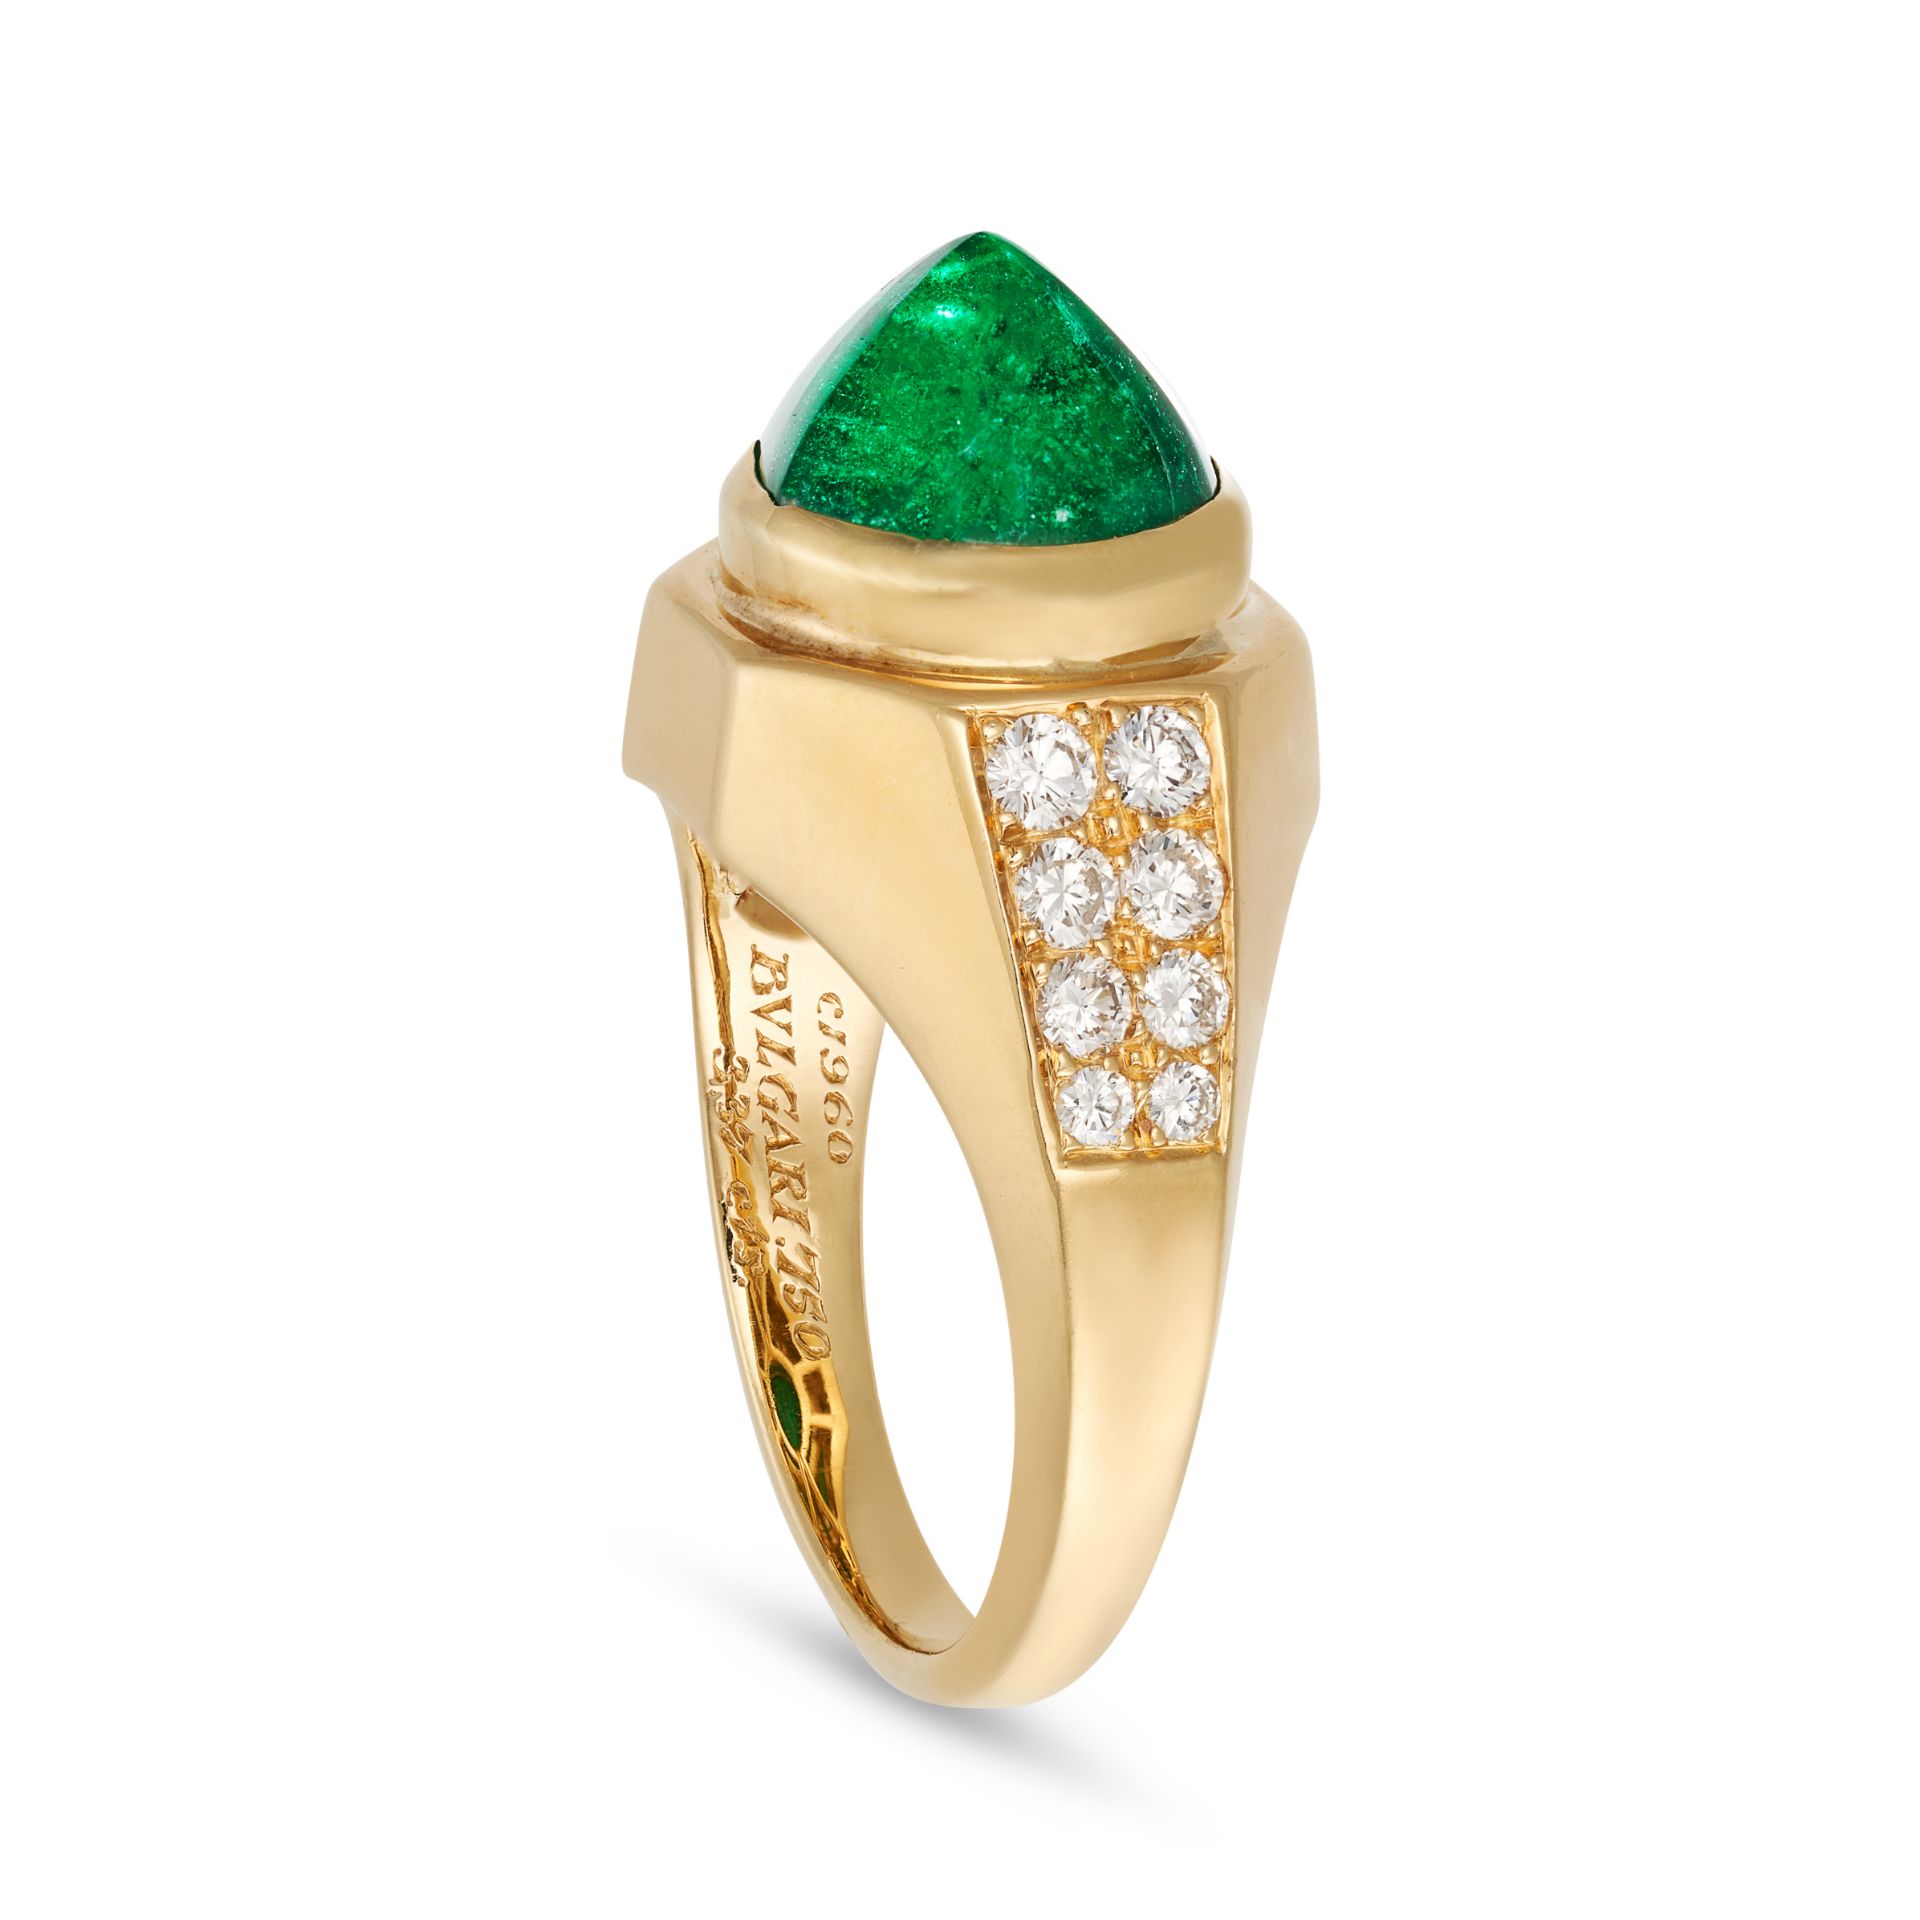 BULGARI, A FINE EMERALD AND DIAMOND RING, 1960 in 18ct yellow gold, set with a cabochon emerald o... - Image 2 of 2